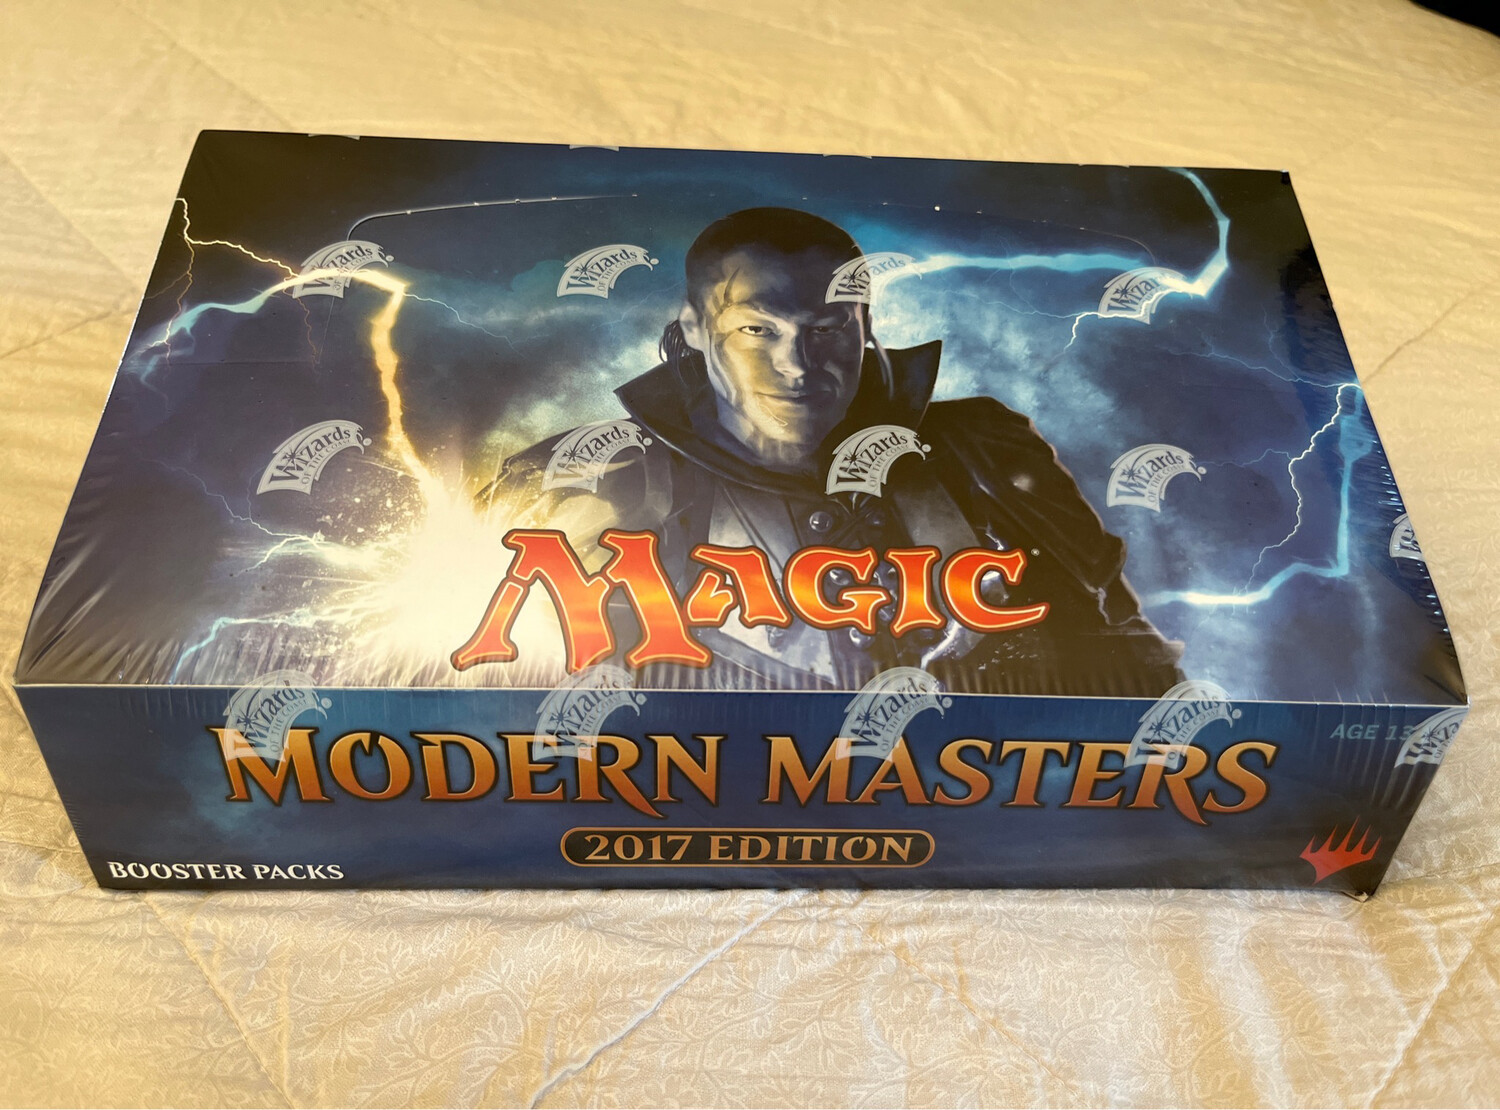 Modern Masters 2017 Edition Booster Display